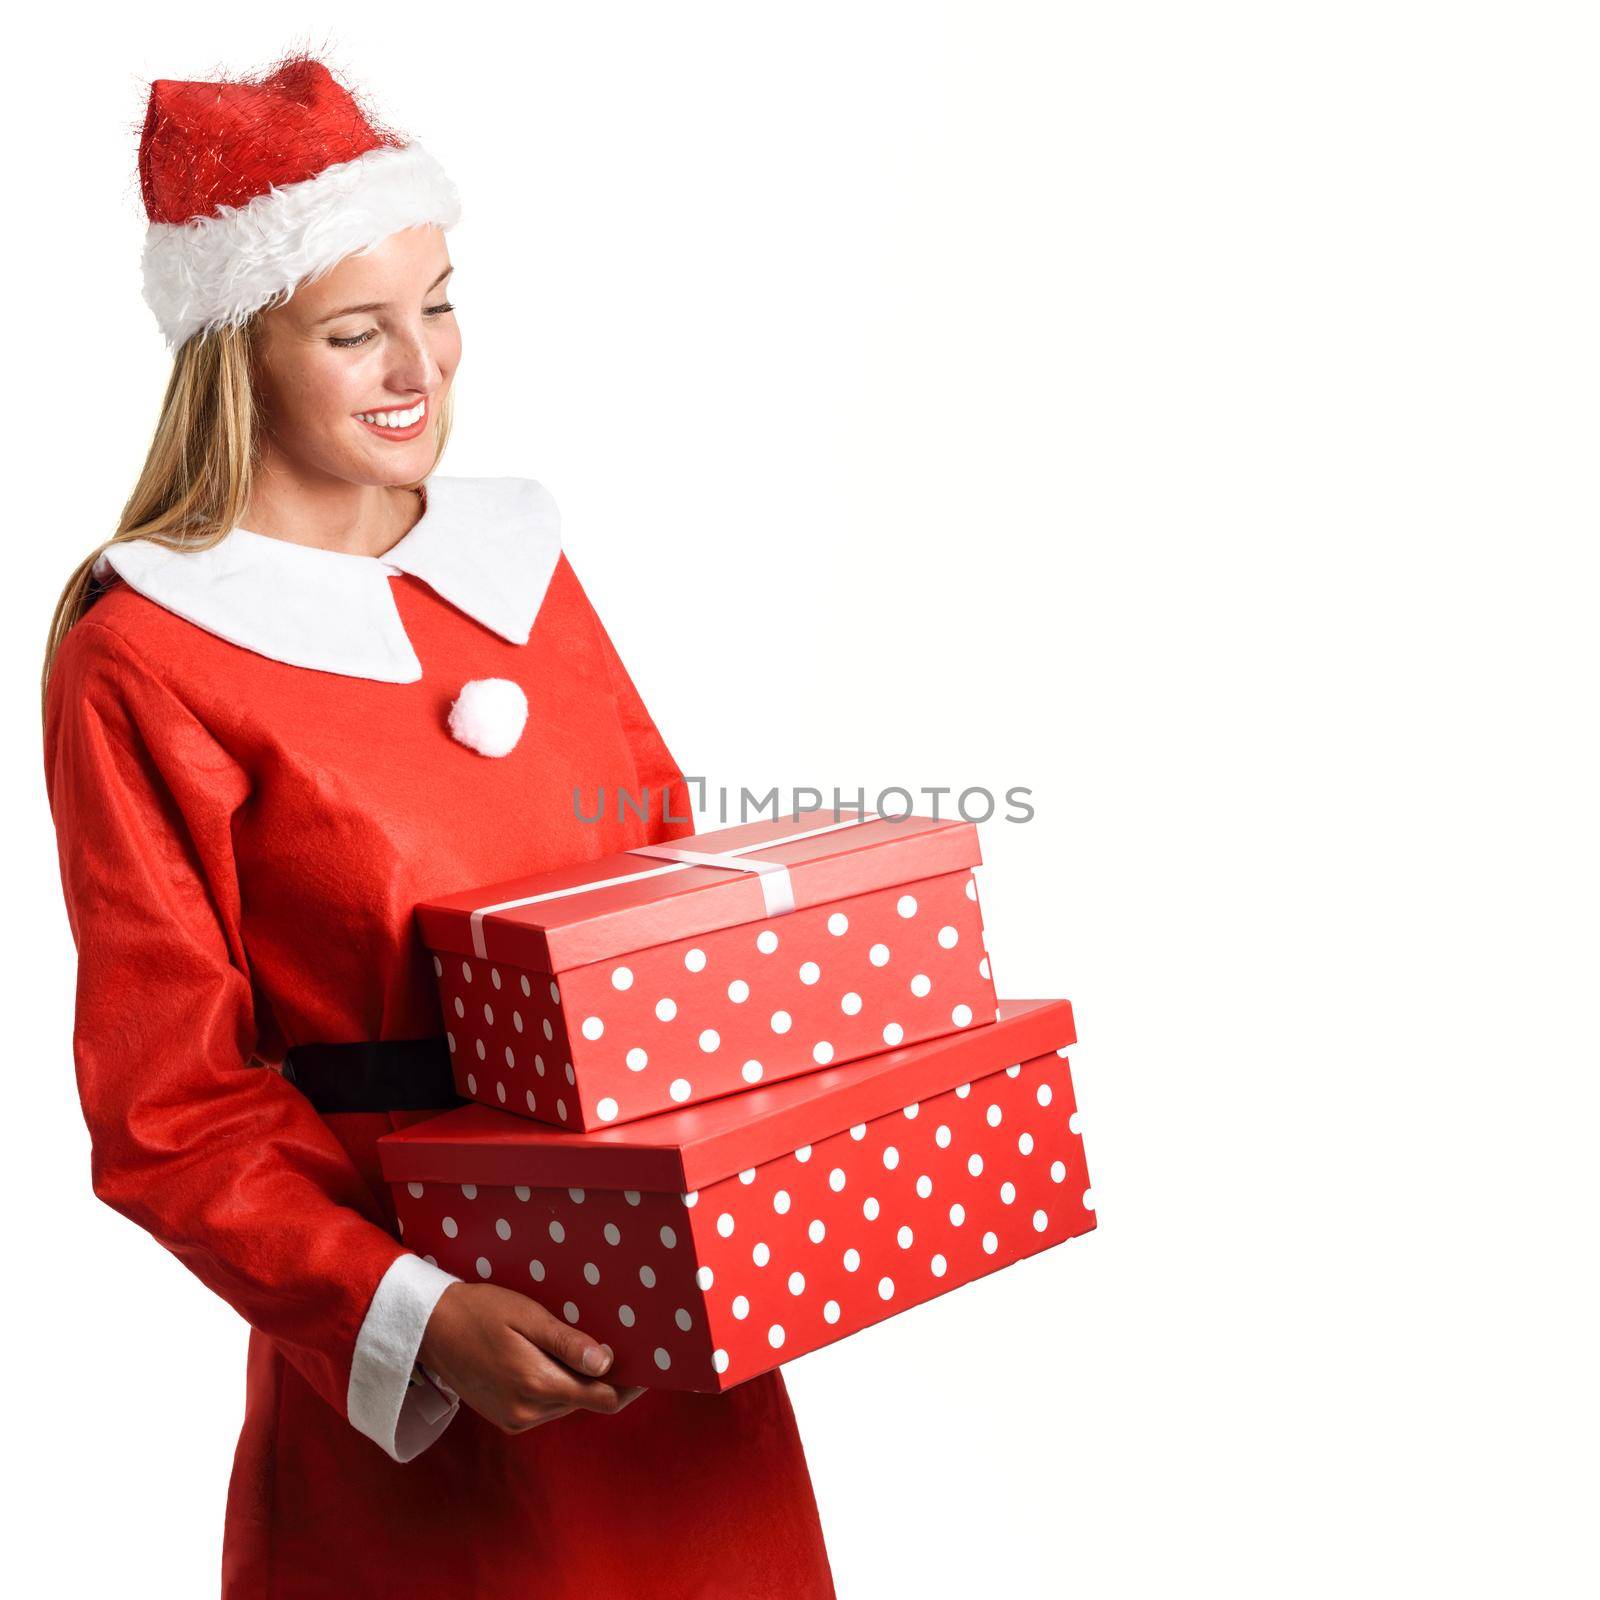 Blonde woman in Santa Claus clothes smiling with gift boxes in her hands. Young female with blue eyes, isolated on white